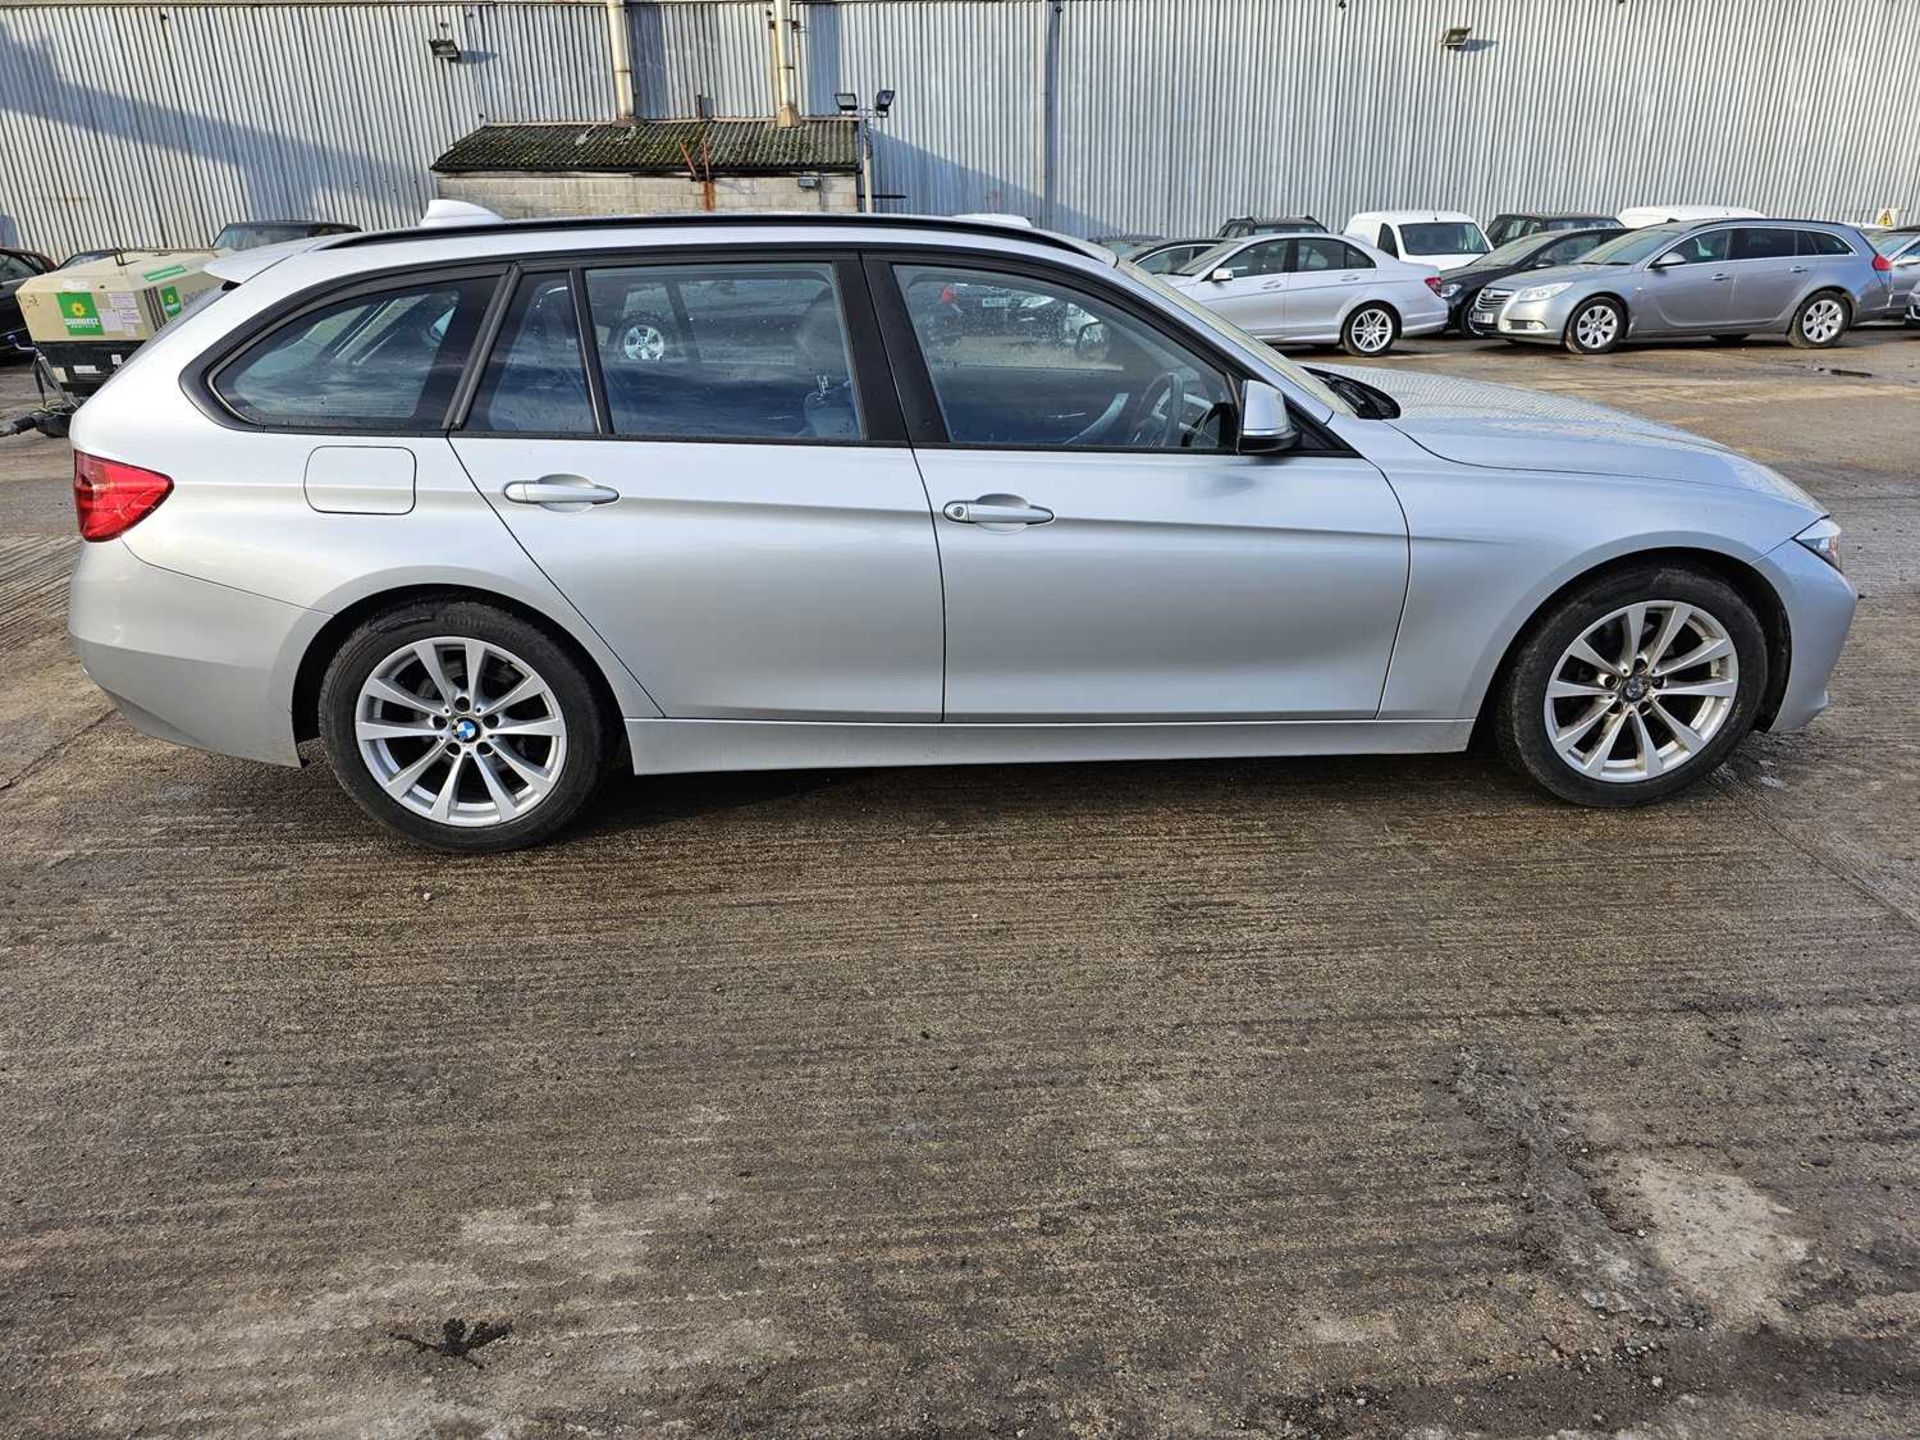 2013 BMW 320D Estate, Auto, Parking Sensors, Full Leather, Heated Seats, Bluetooth, Cruise Control,  - Image 7 of 29